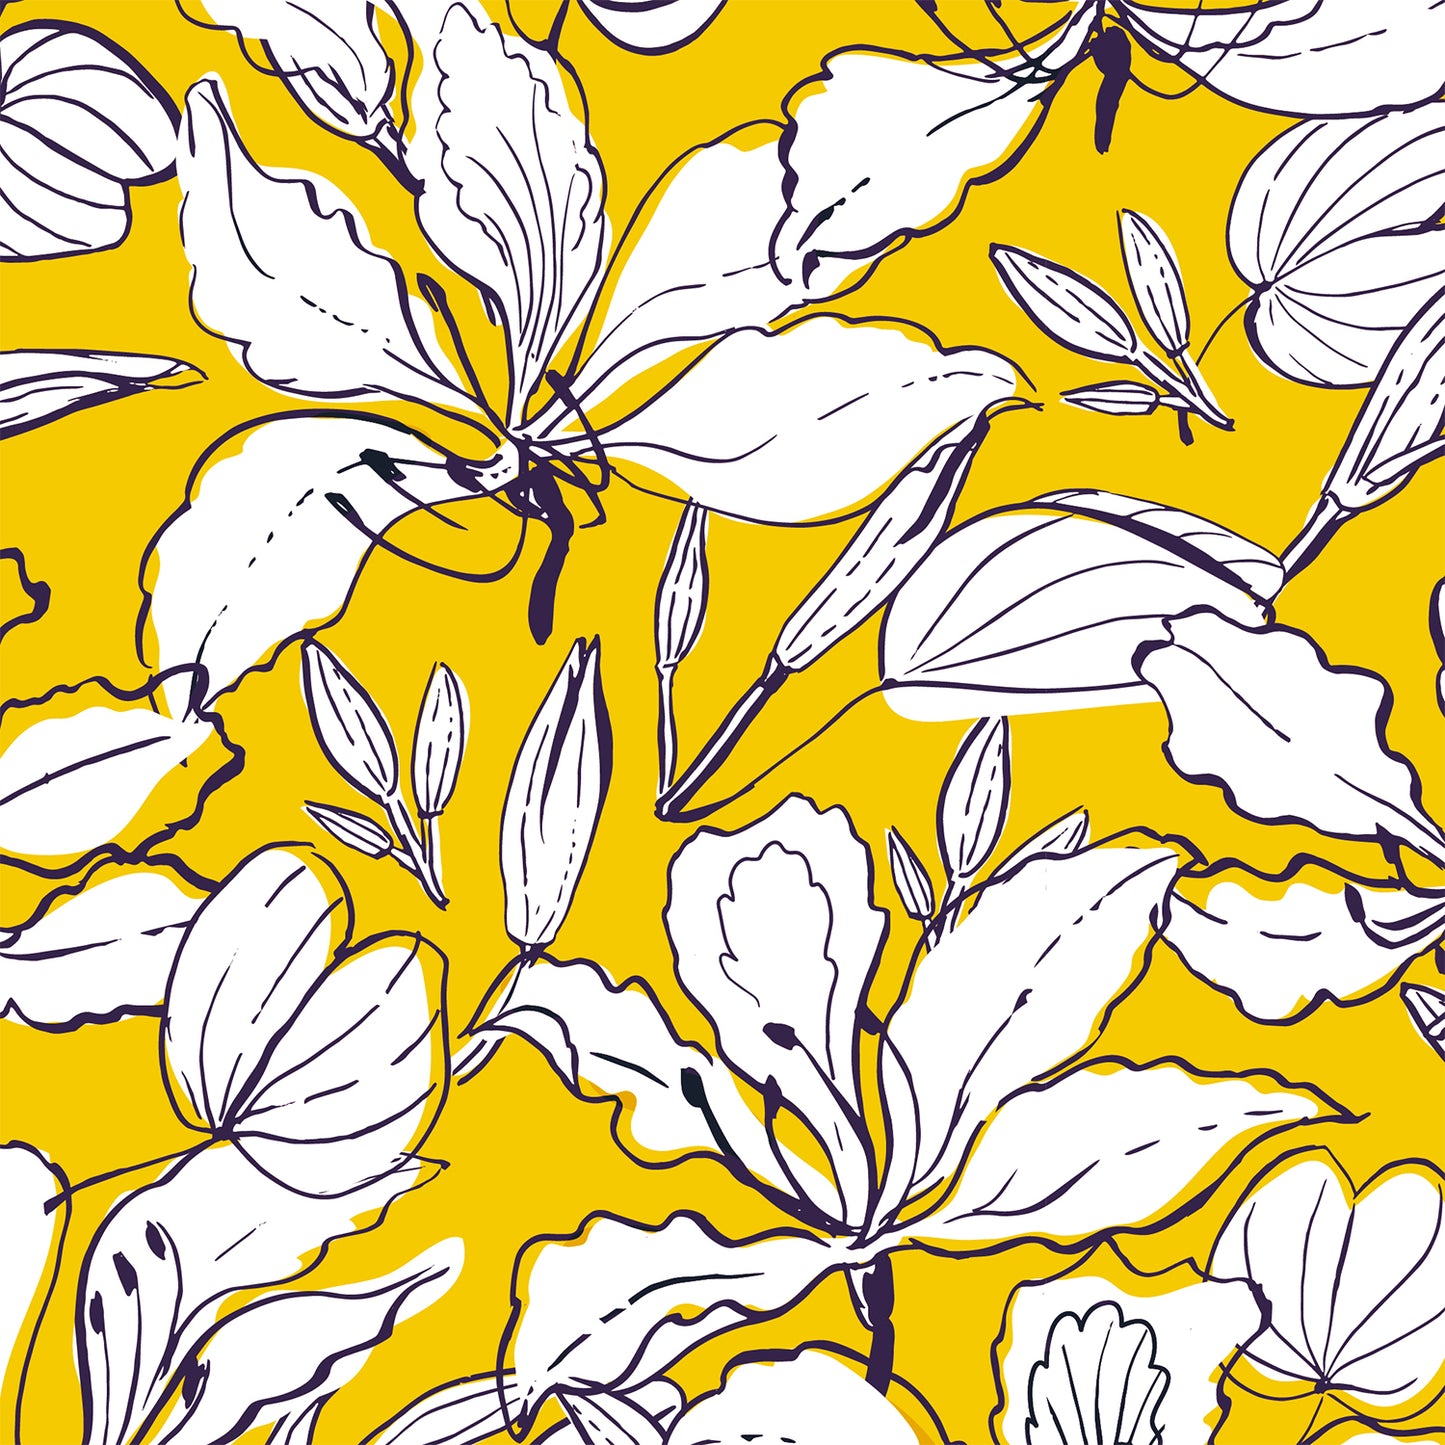 Lily in Bright Yellow Flat Wrapping Paper Sheet Wholesale Wraphaholic